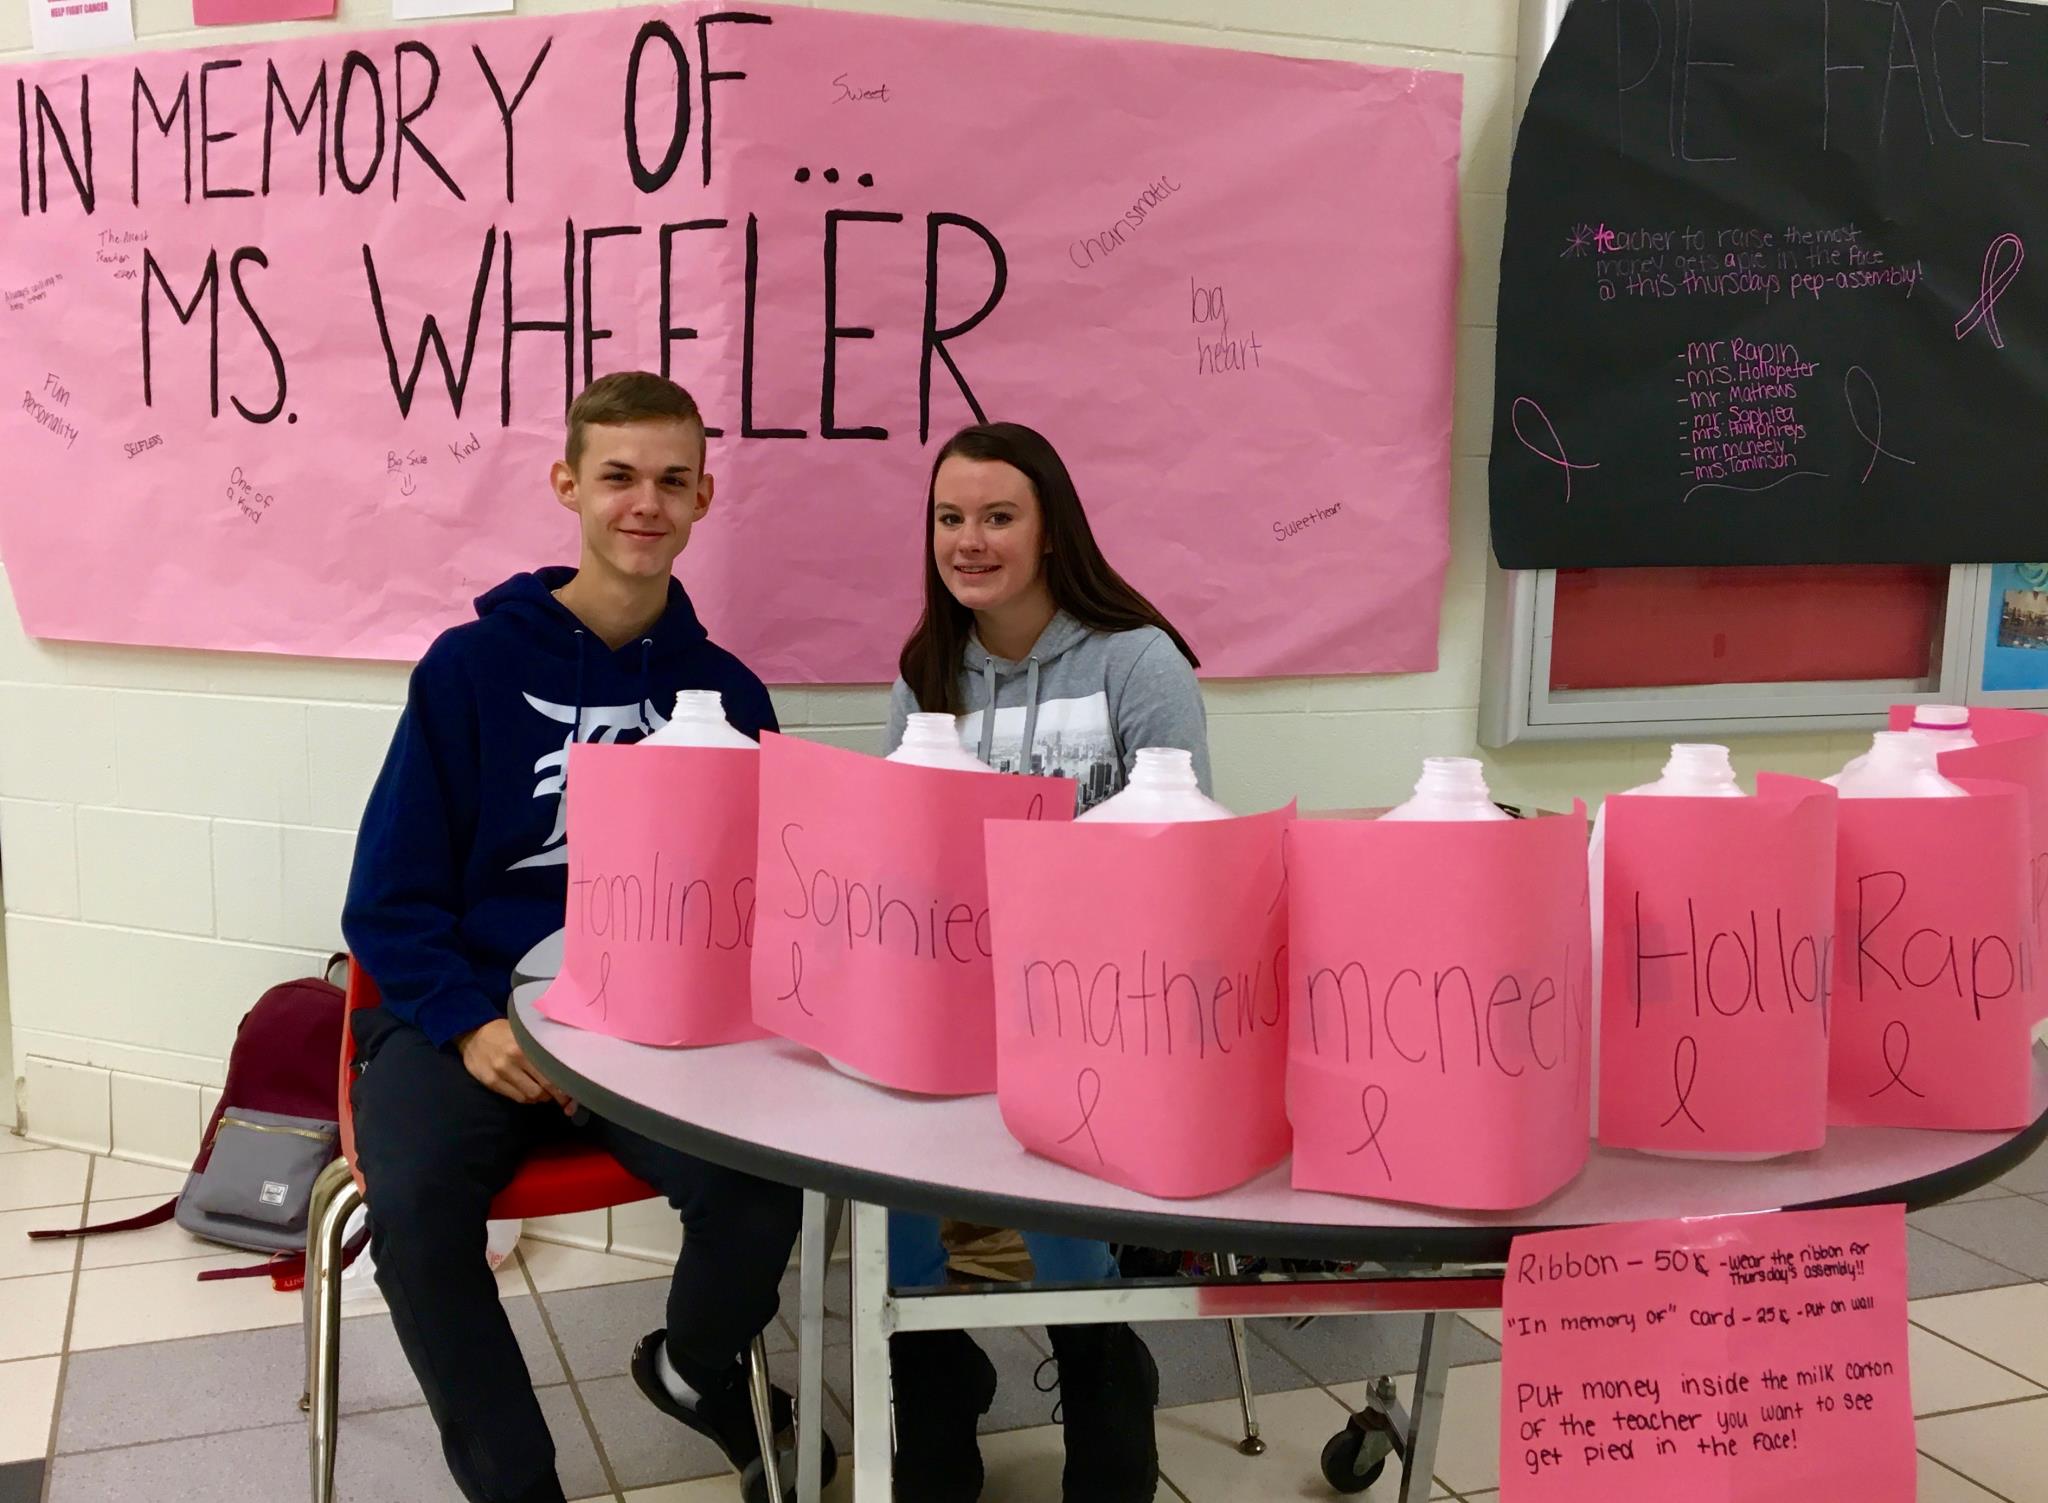 Fundraiser sign in memory of Mrs. Wheeler and kids with donations cans